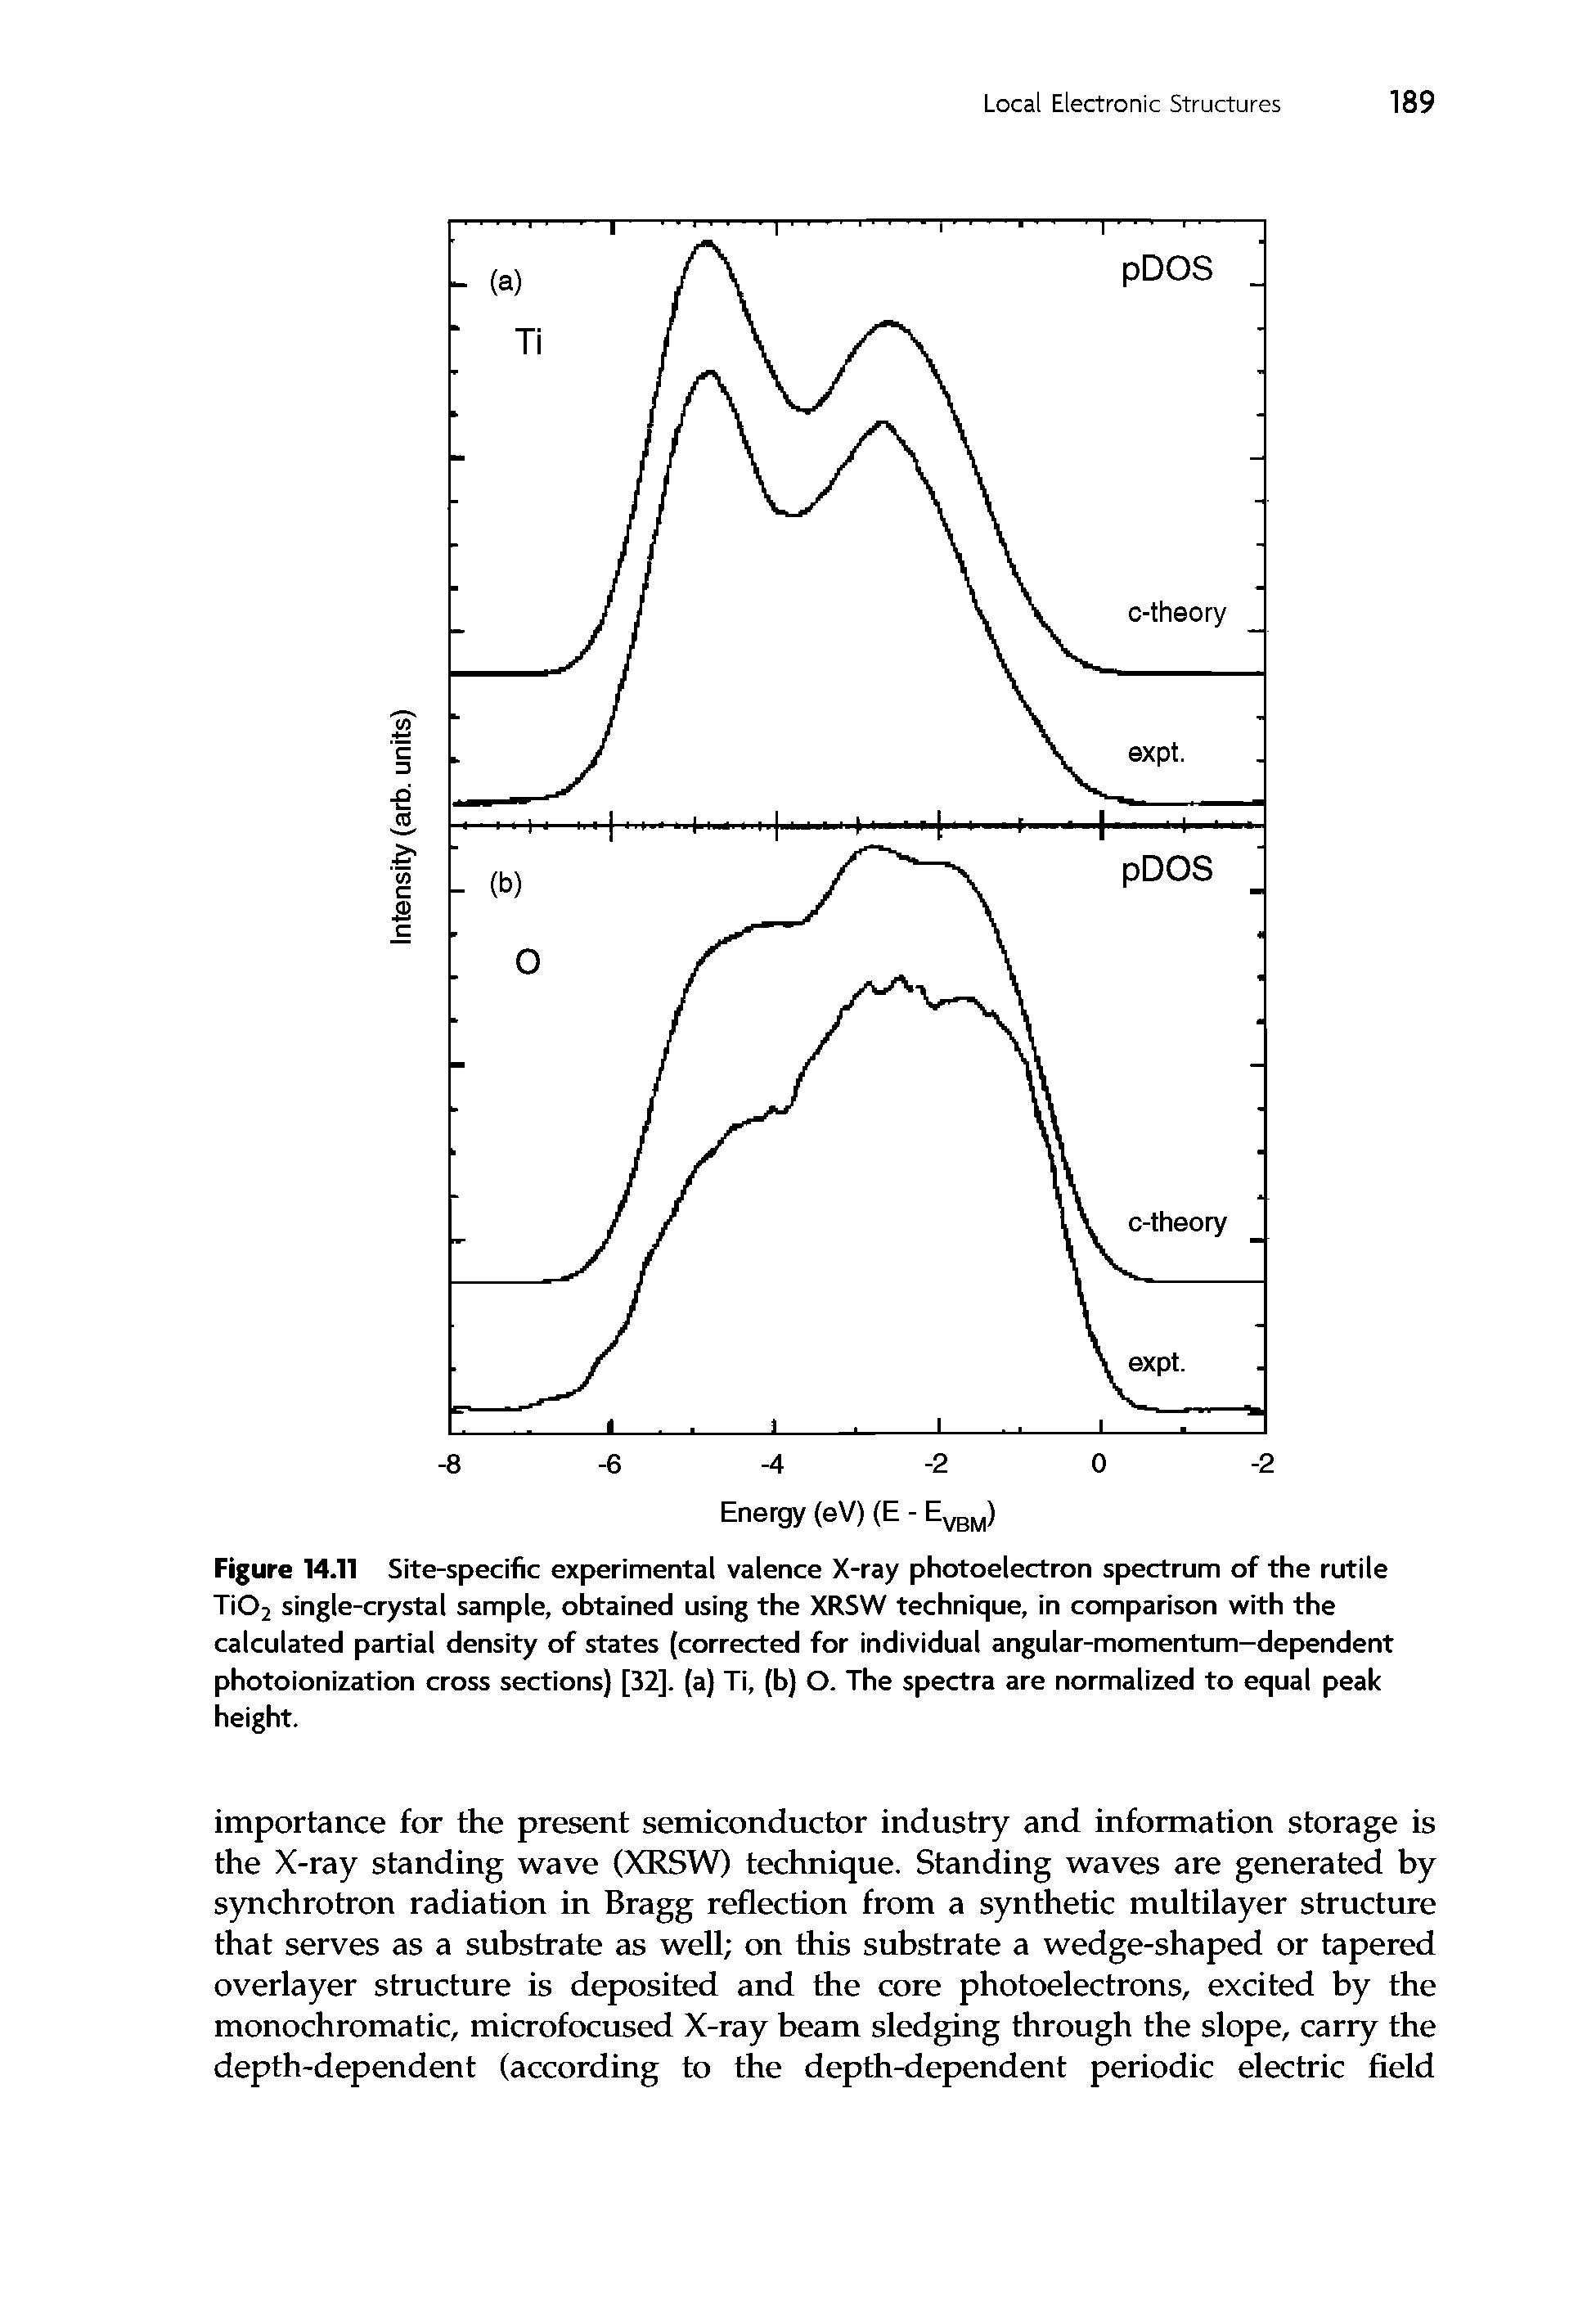 Figure 14.11 Site-specific experimental valence X-ray photoelectron spectrum of the rutile Ti02 single-crystal sample, obtained using the XRSW technique, in comparison with the calculated partial density of states (corrected for individual angular-momentum-dependent photoionization cross sections) [32]. (a) Ti, (b) O. The spectra are normalized to equal peak height.